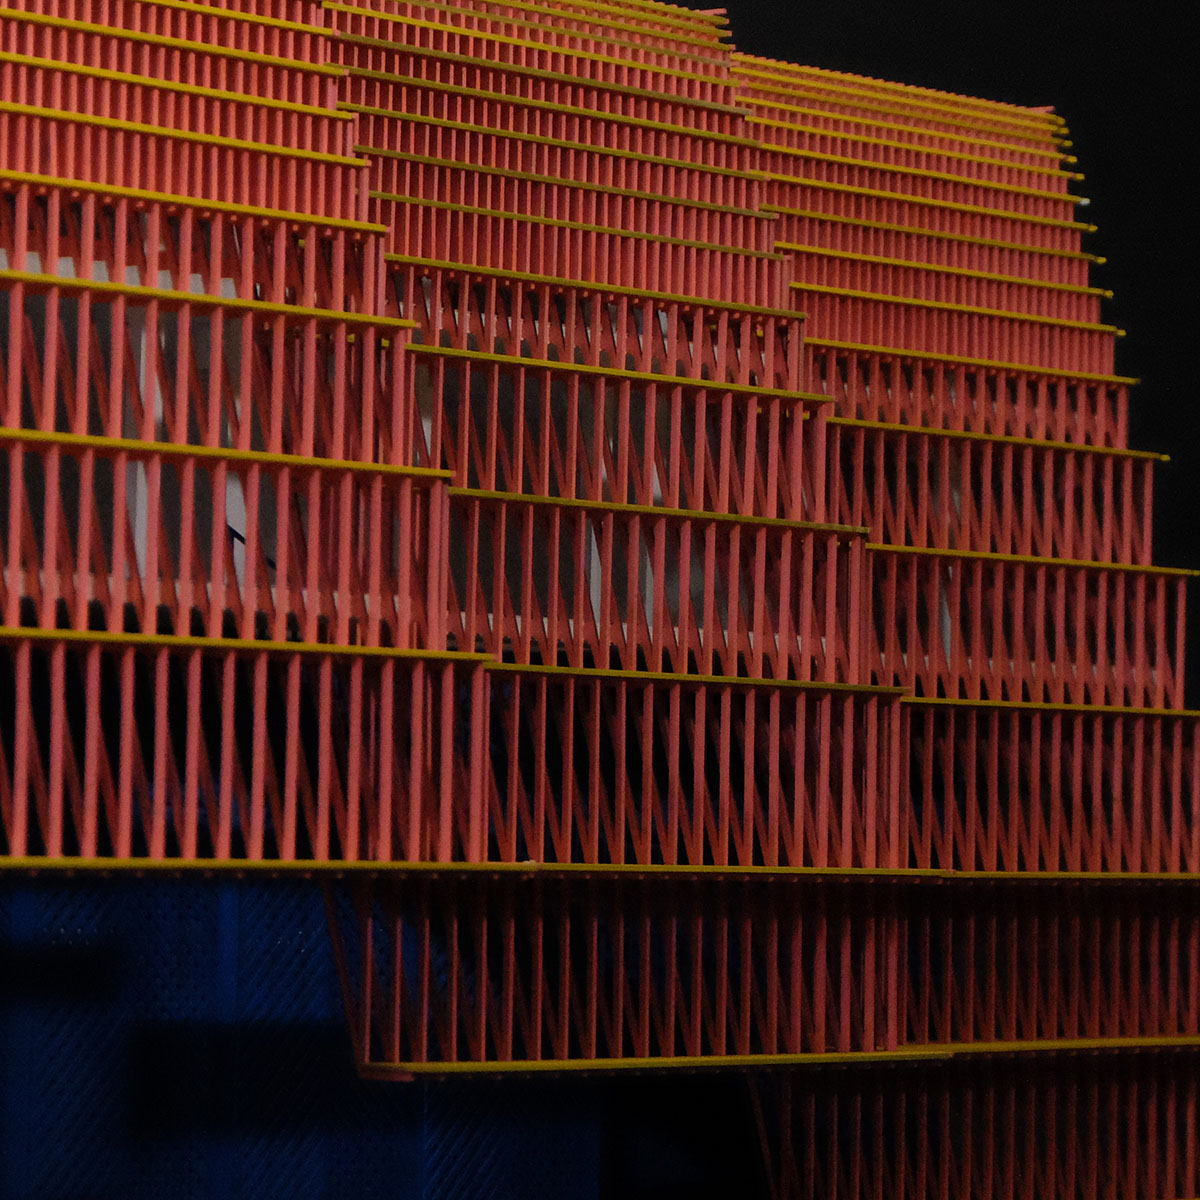 Model showing the density of pink louvers on the building.